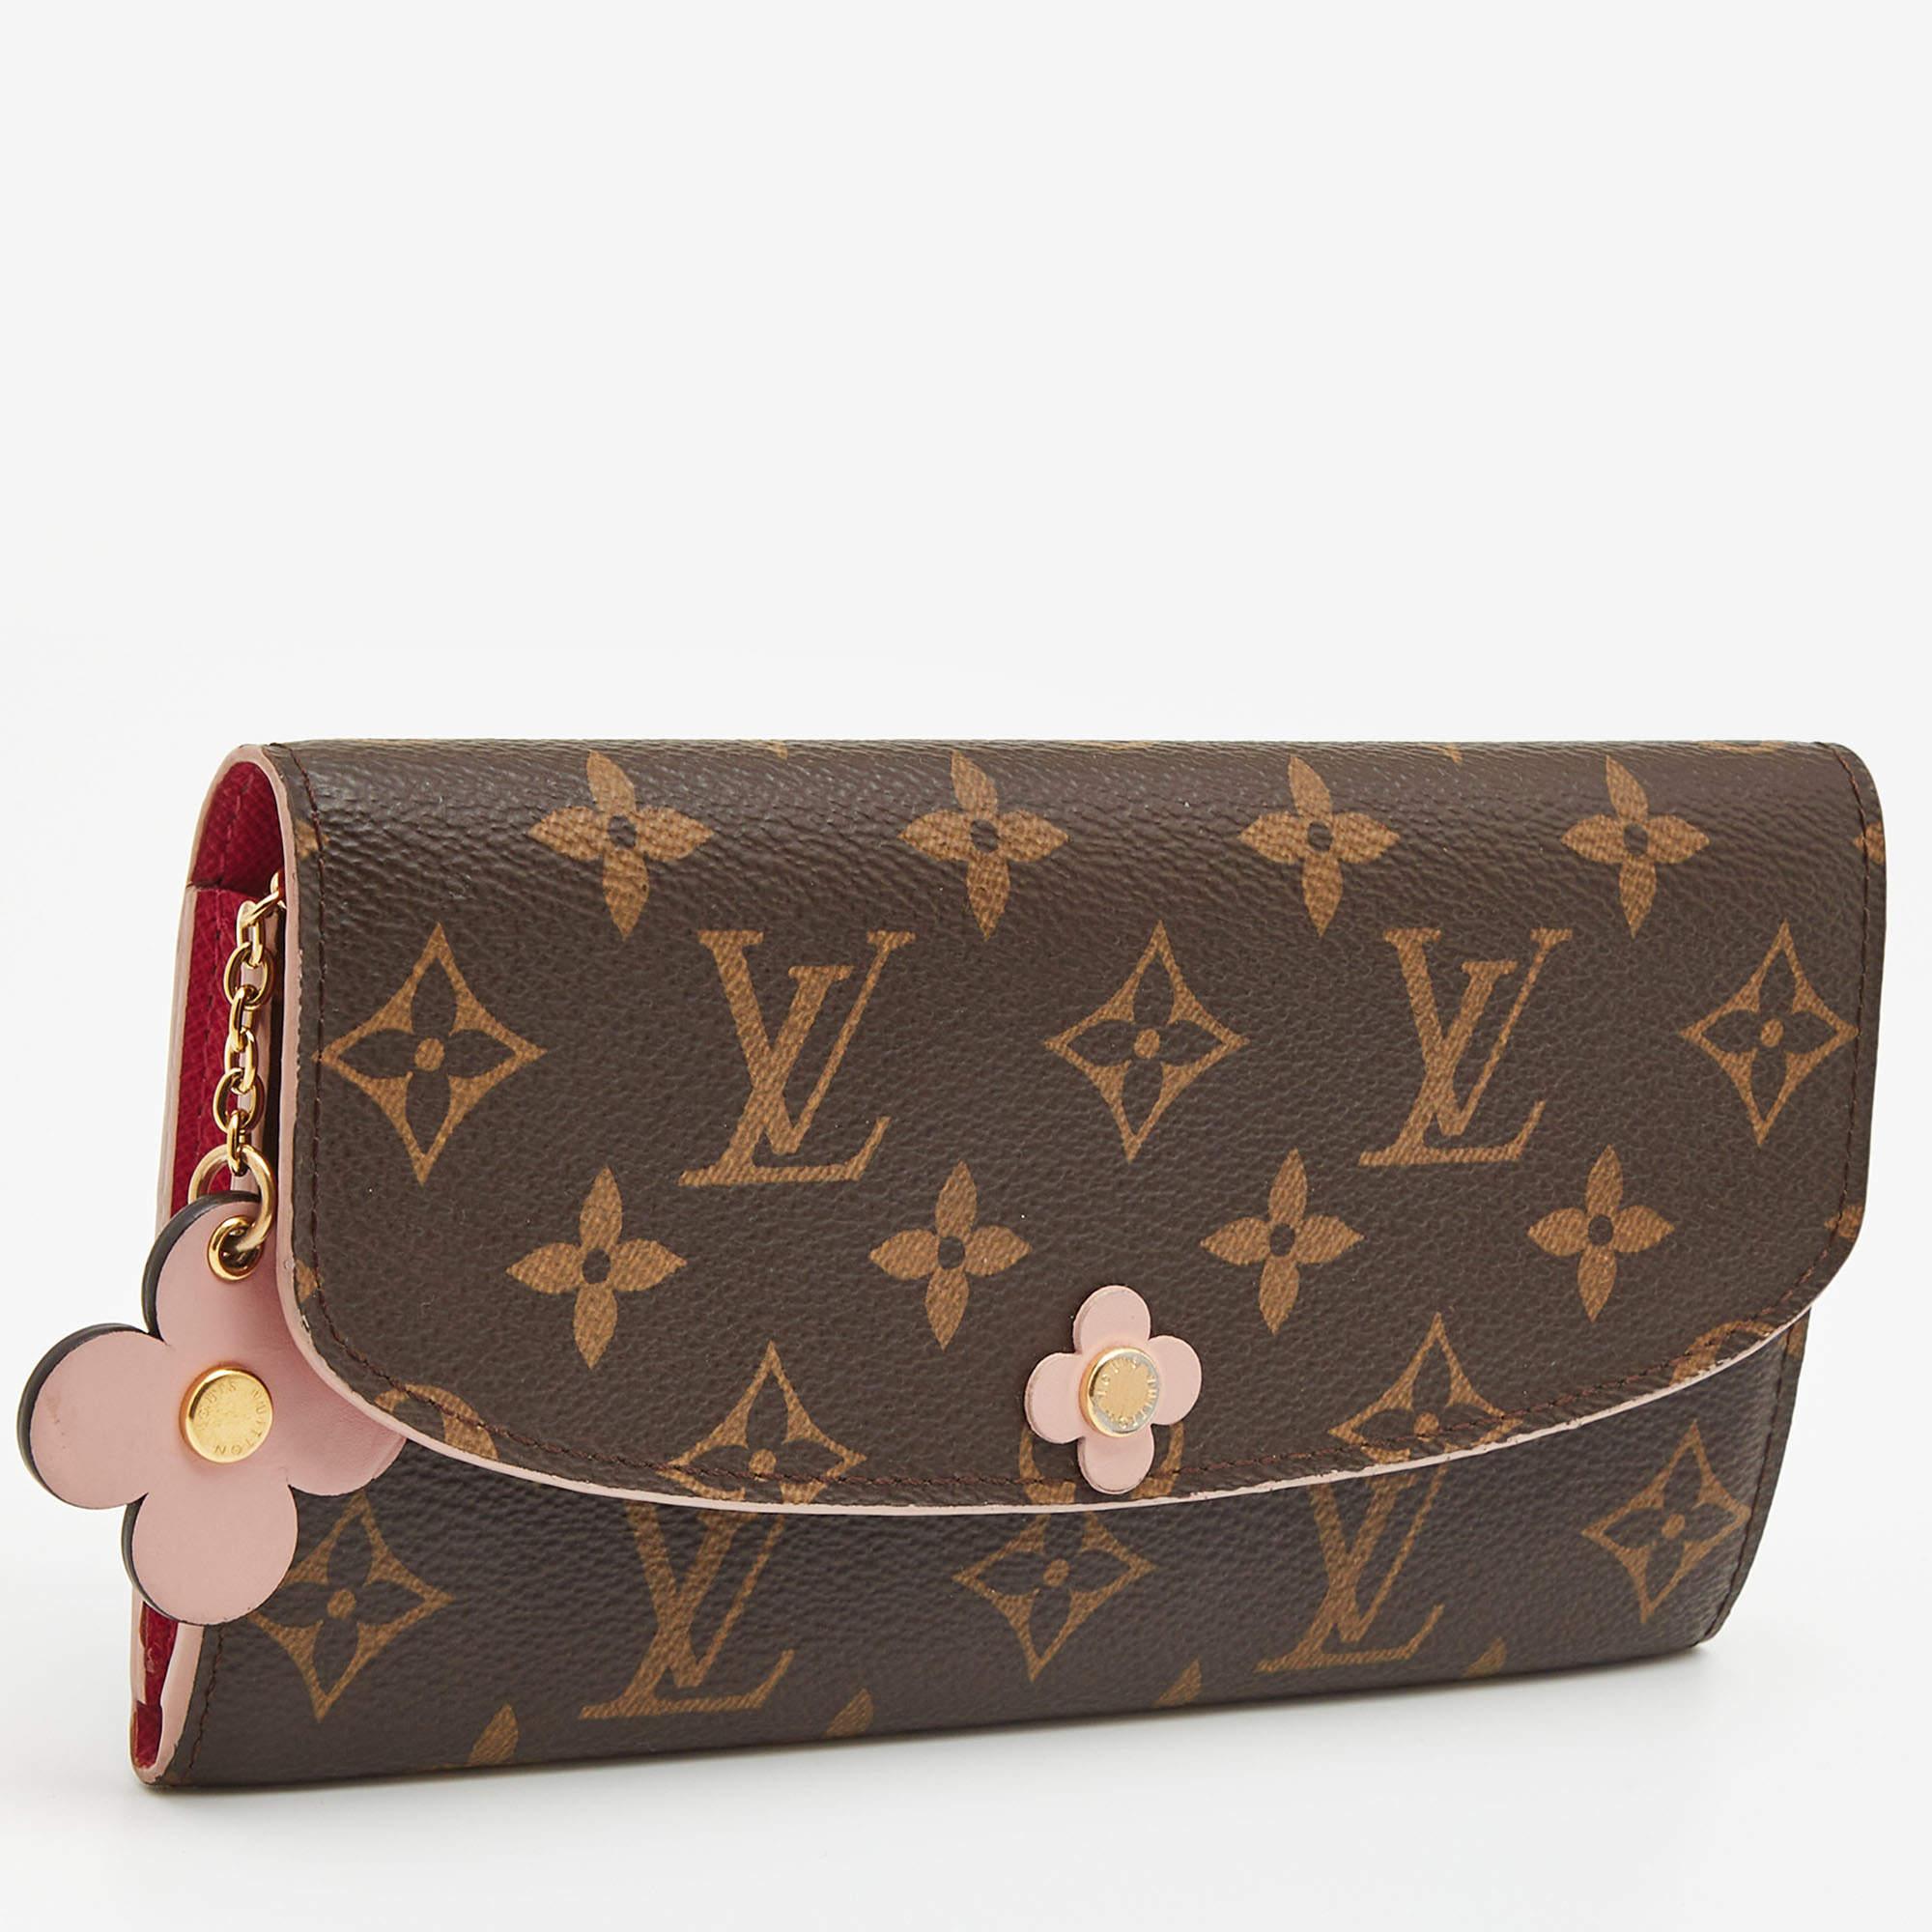 To store all your currencies and cards safely, this Emilie wallet from the House of Louis Vuitton is the best accessory to trust. It is created using Monogram canvas and opens to a leather-lined interior, which consists of neat storage compartments.